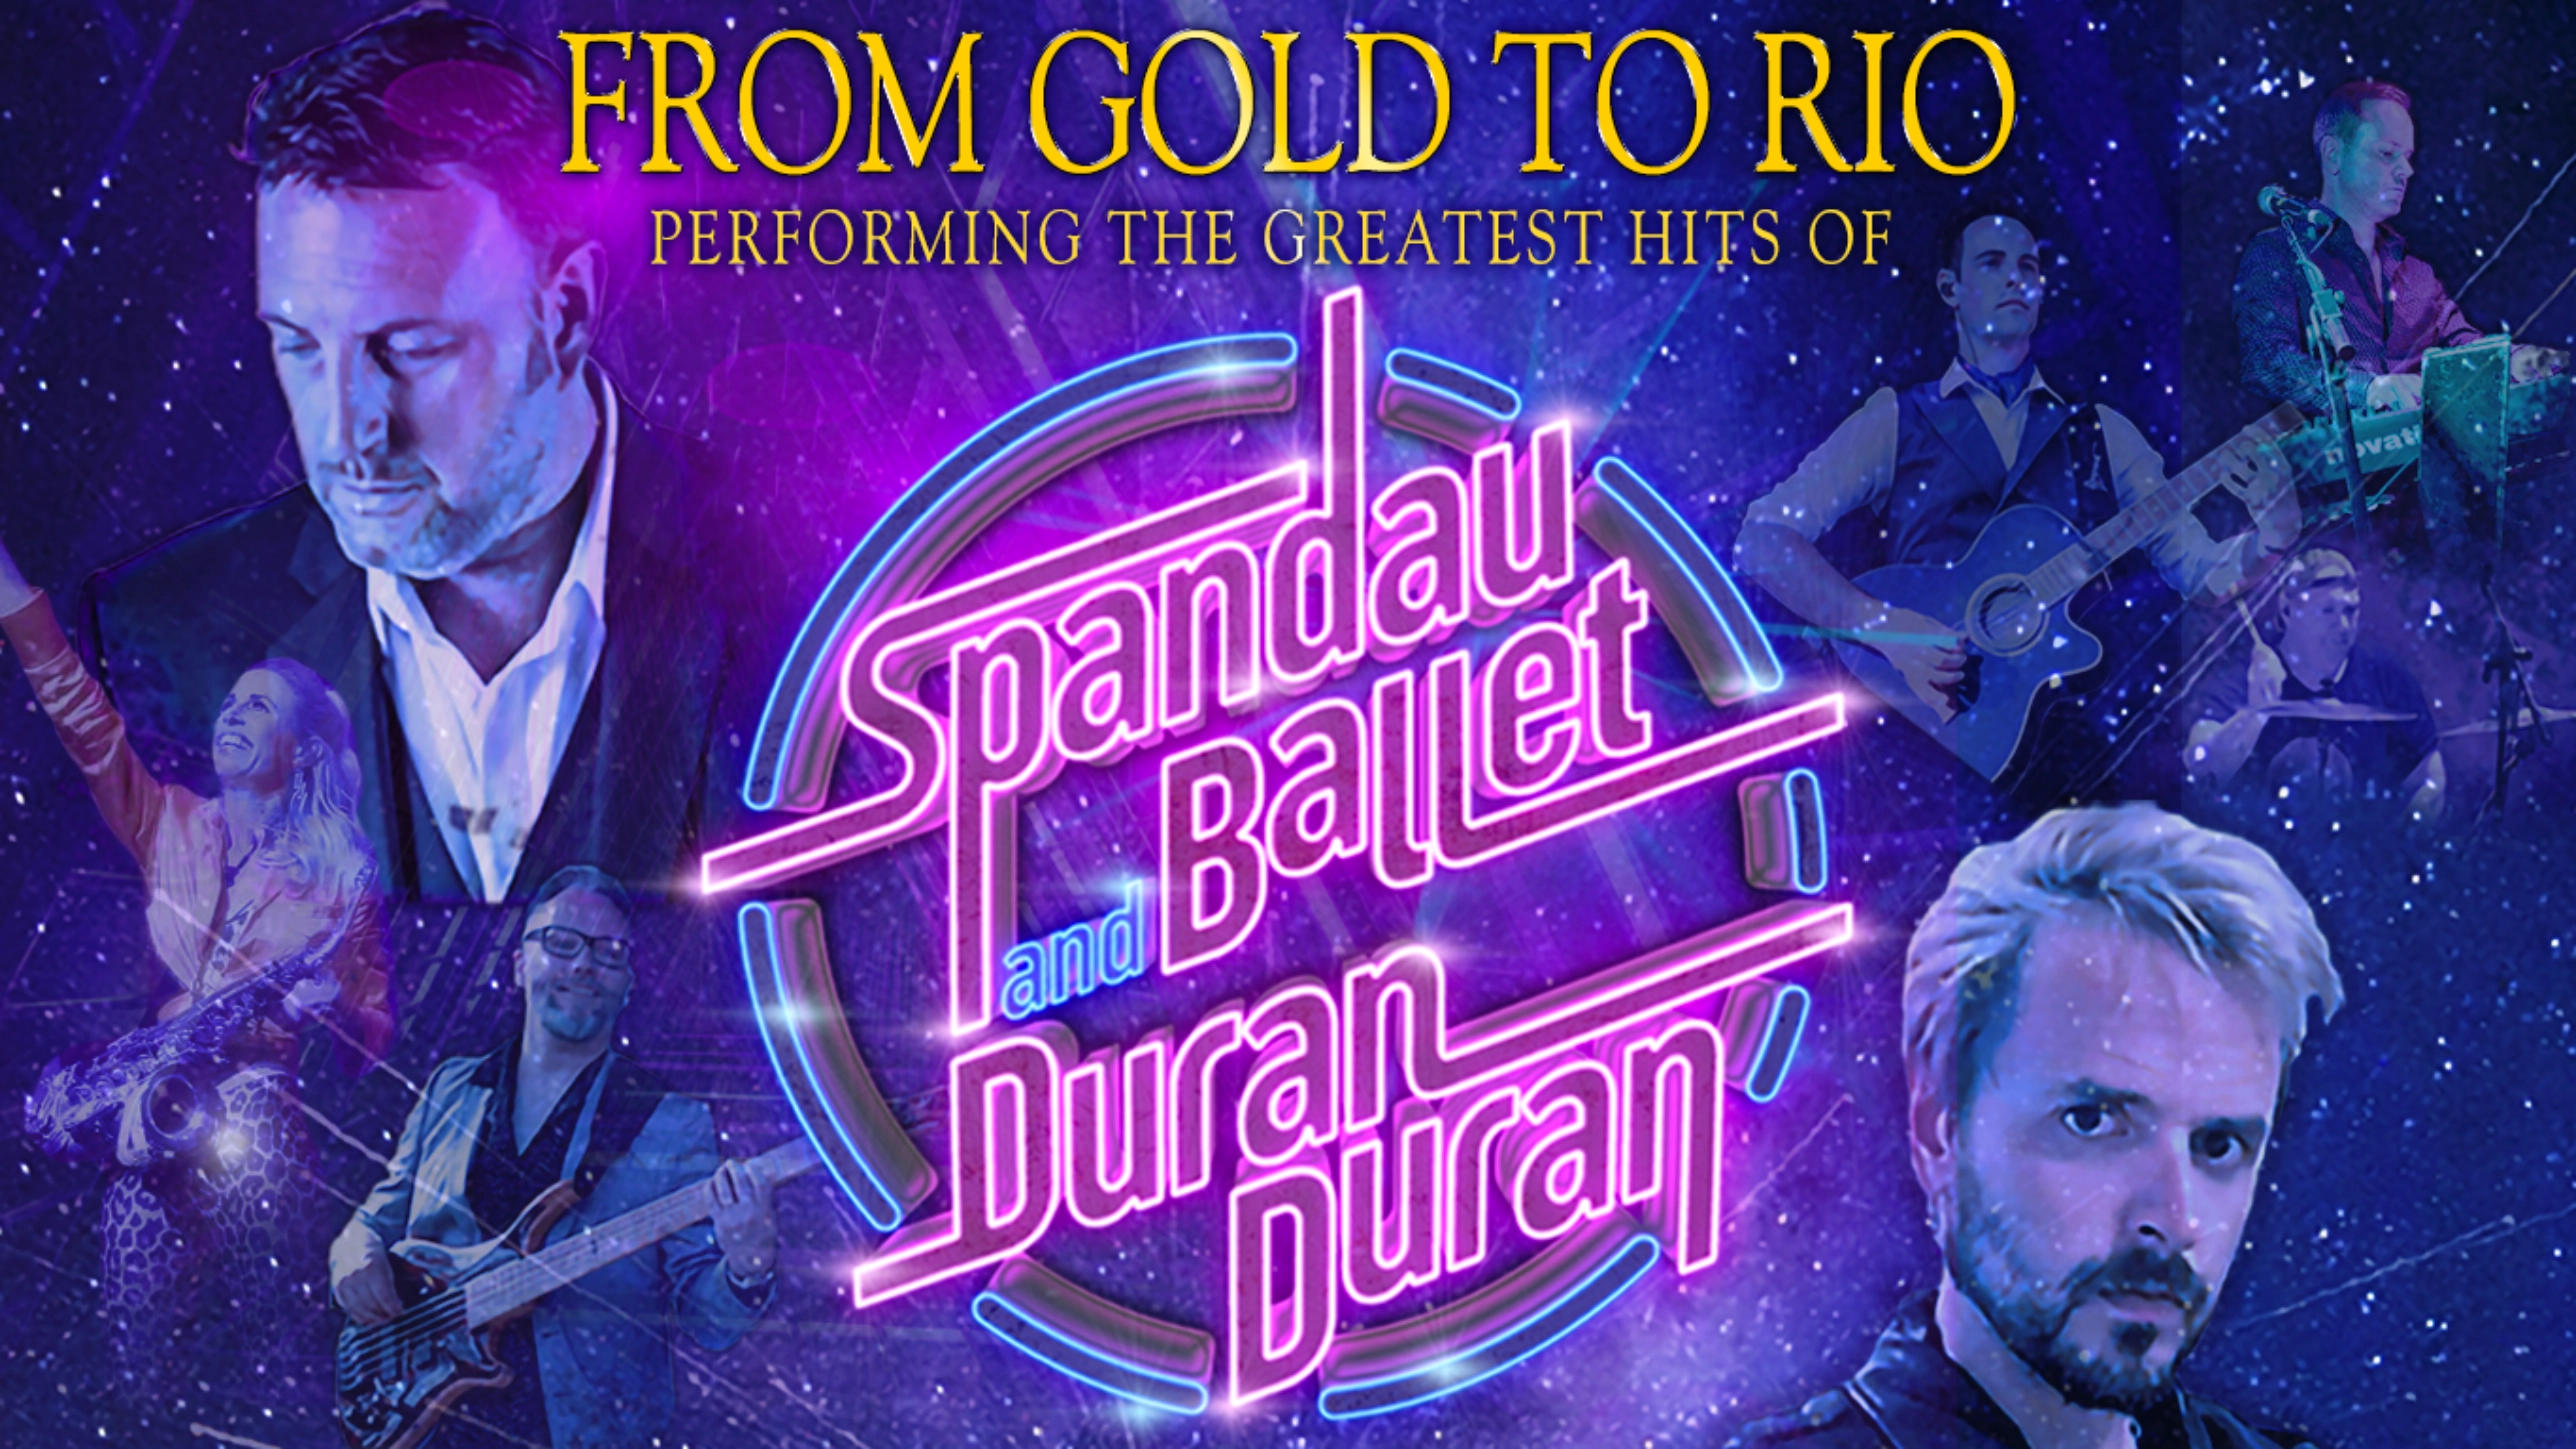 From Gold To Rio-The Greatest Hits Of Spandau & Duran Duran